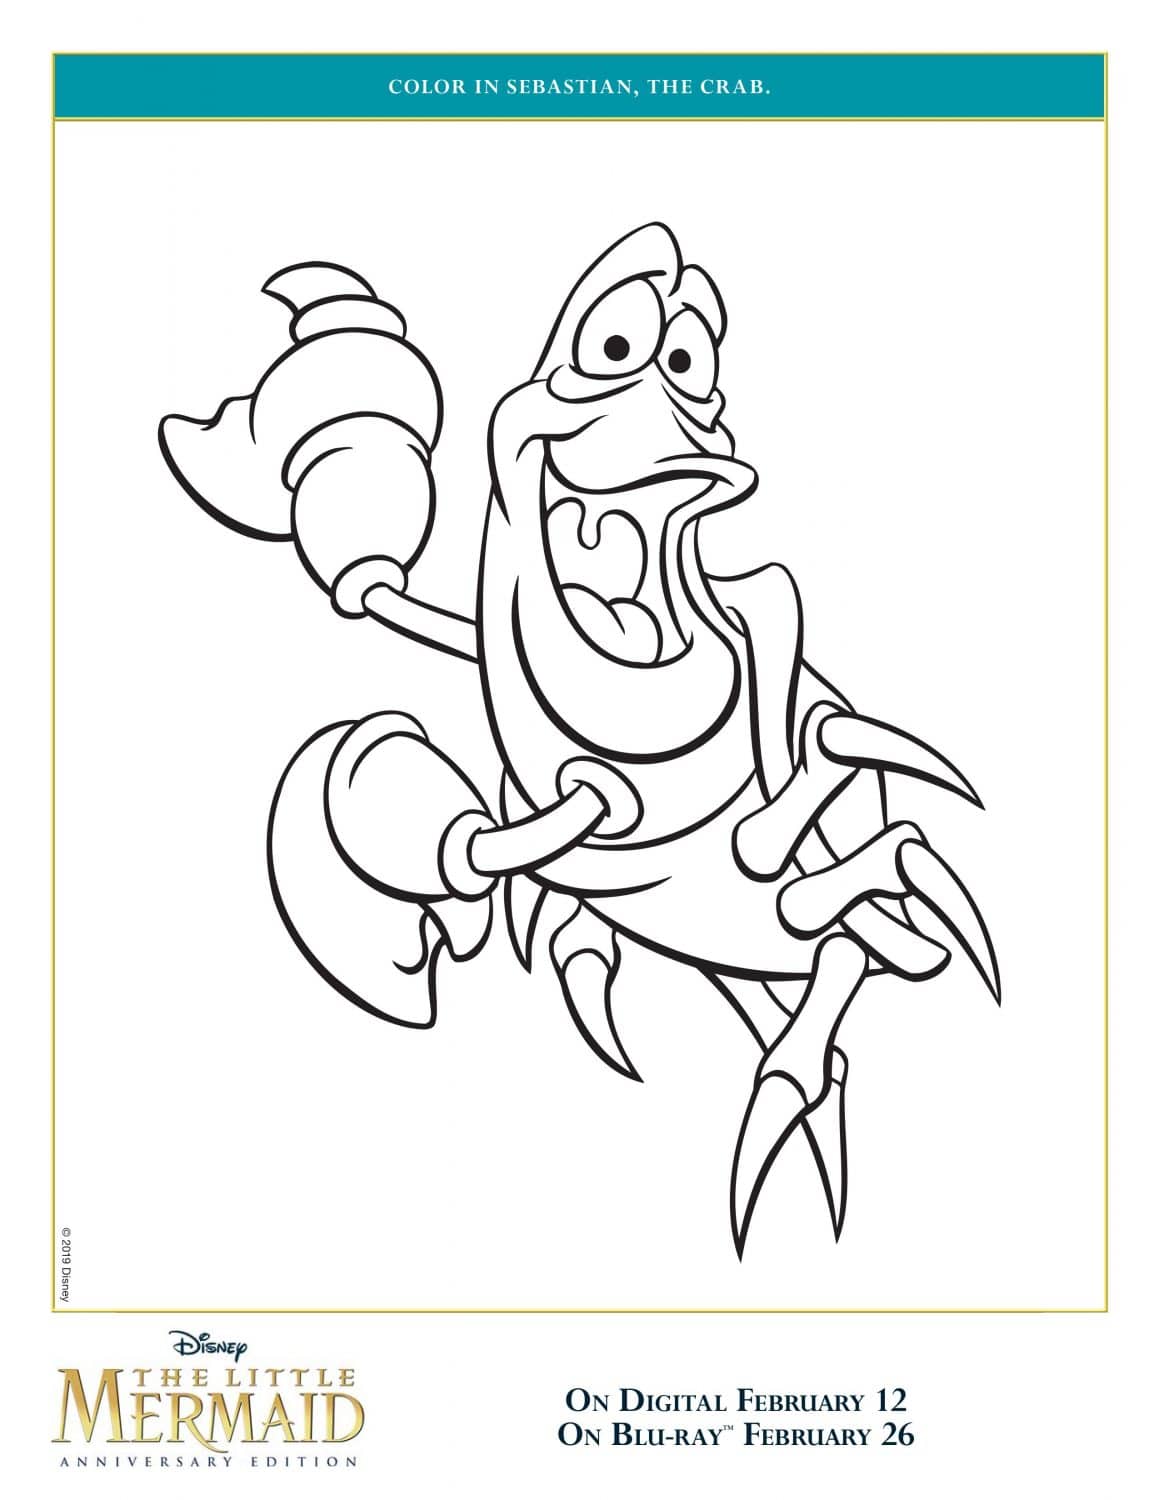 Sebastian from The Little Mermaid Coloring Page